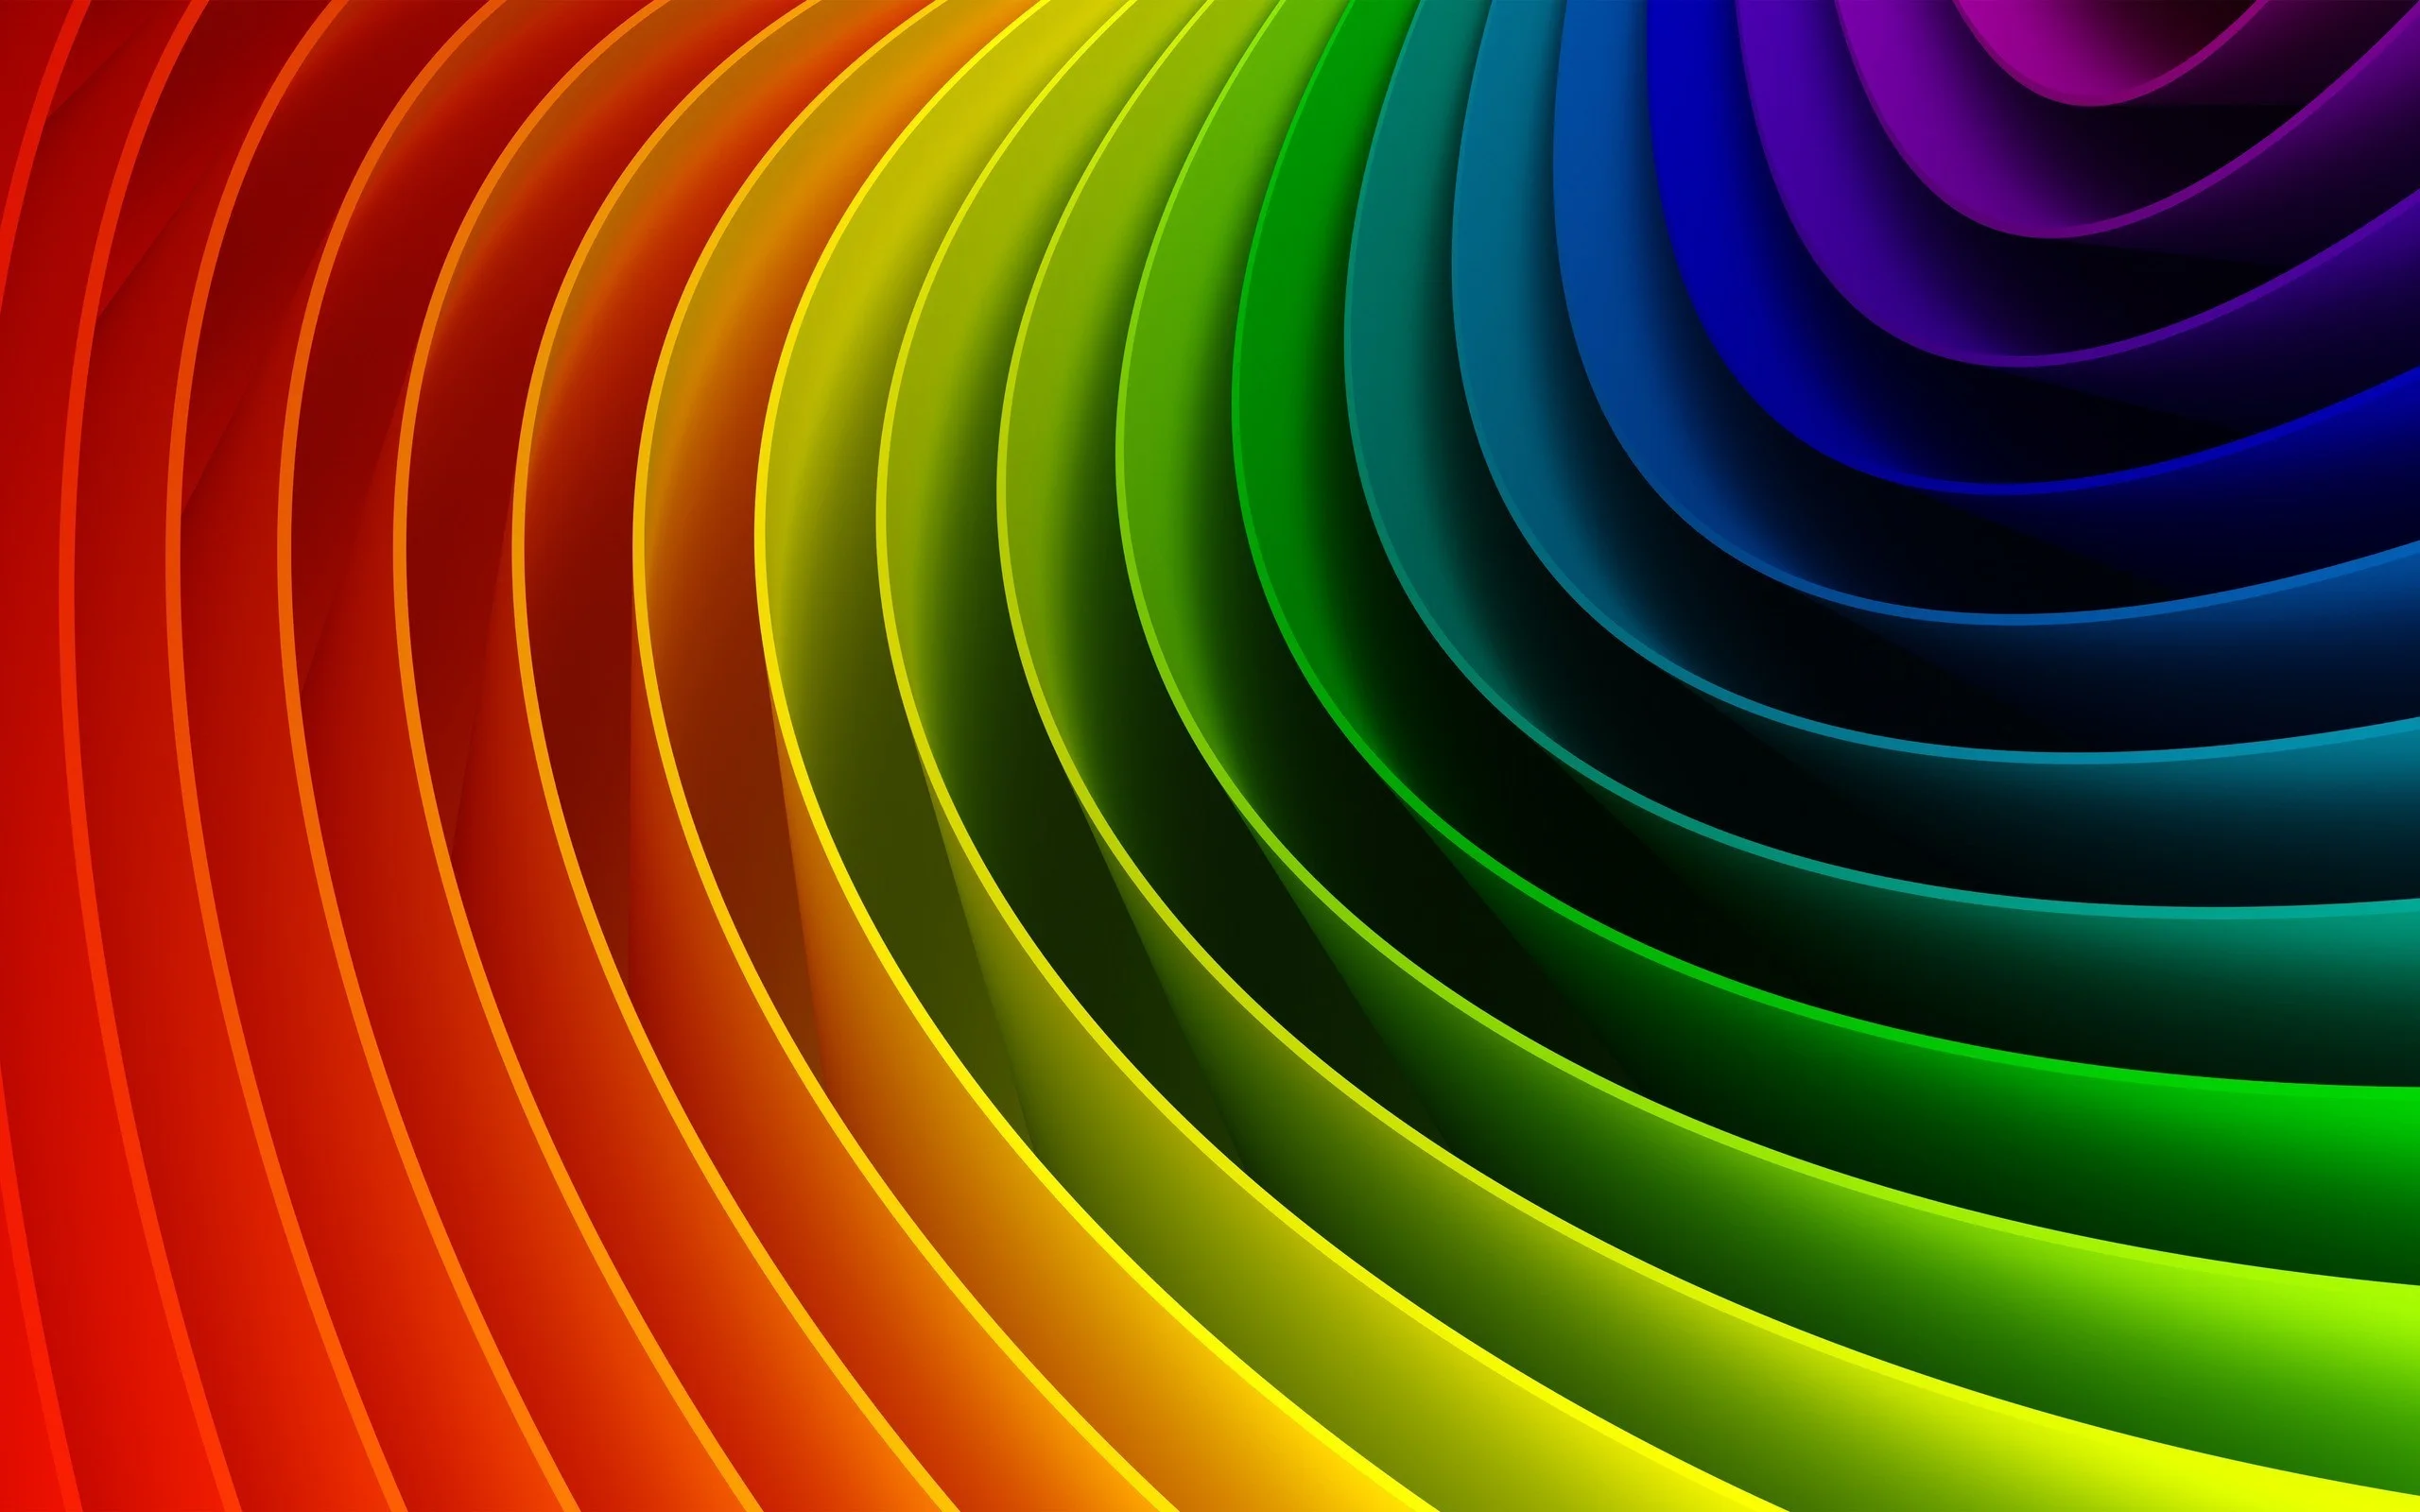 Curved colorful rainbow desktop PC and Mac wallpaper